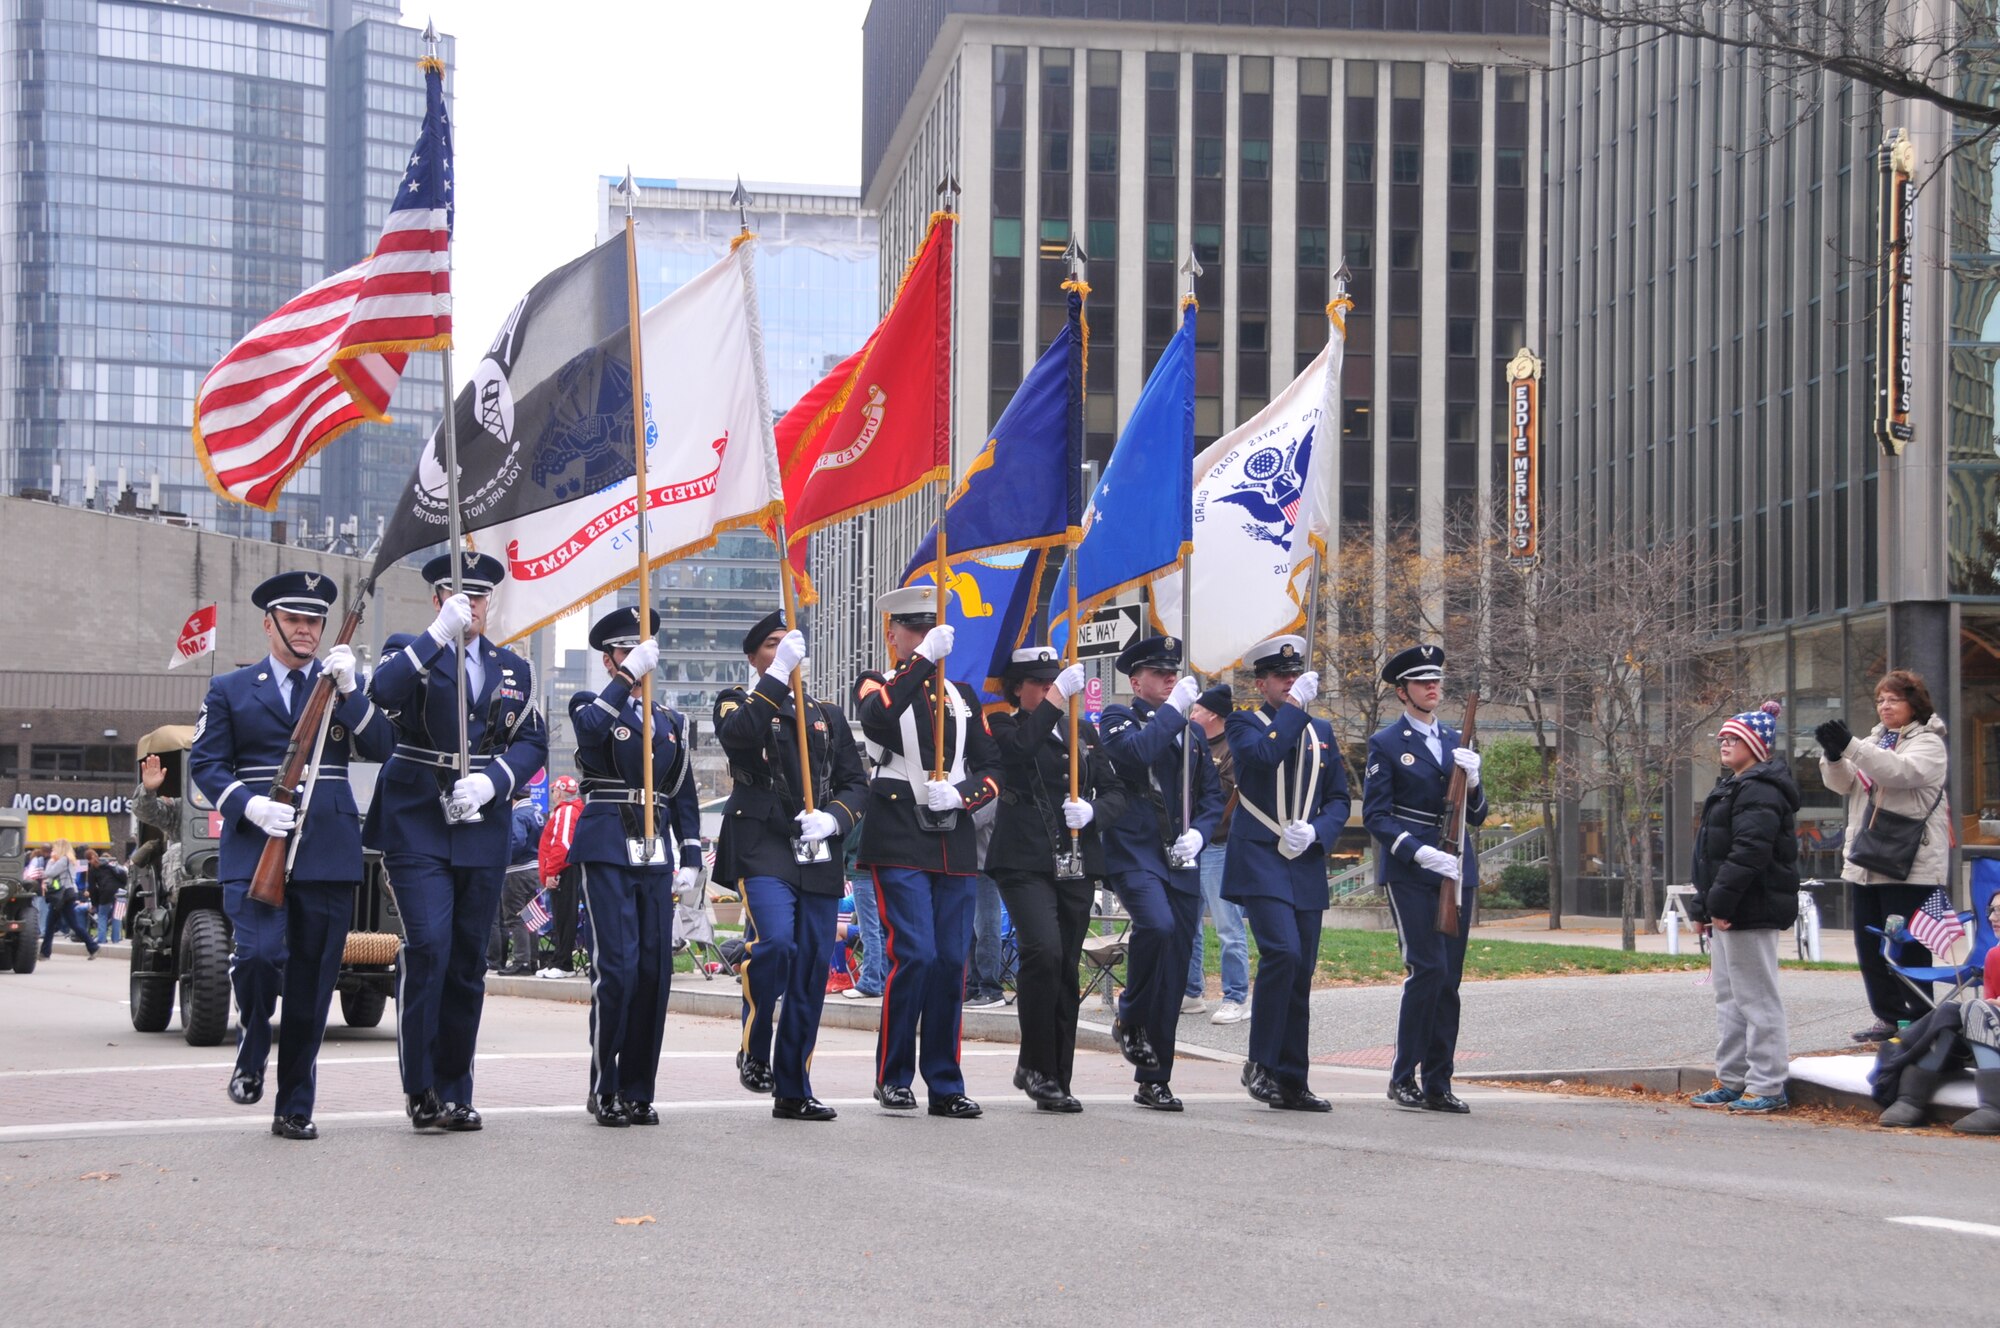 A joint service color guard, including members of the 171st Air Refueling Wing, march in the Veterans' Parade. The Pennsylvania National Guard joined with the Pennsylvania Department of Conservation of Natural Resources' Point State Park and the Association of the United States Army to organize Steel City Salutes the Troops, Pittsburgh, Nov. 7, 2015.  (U.S. Air National Guard Photo by Staff Sgt. Ryan Conley)